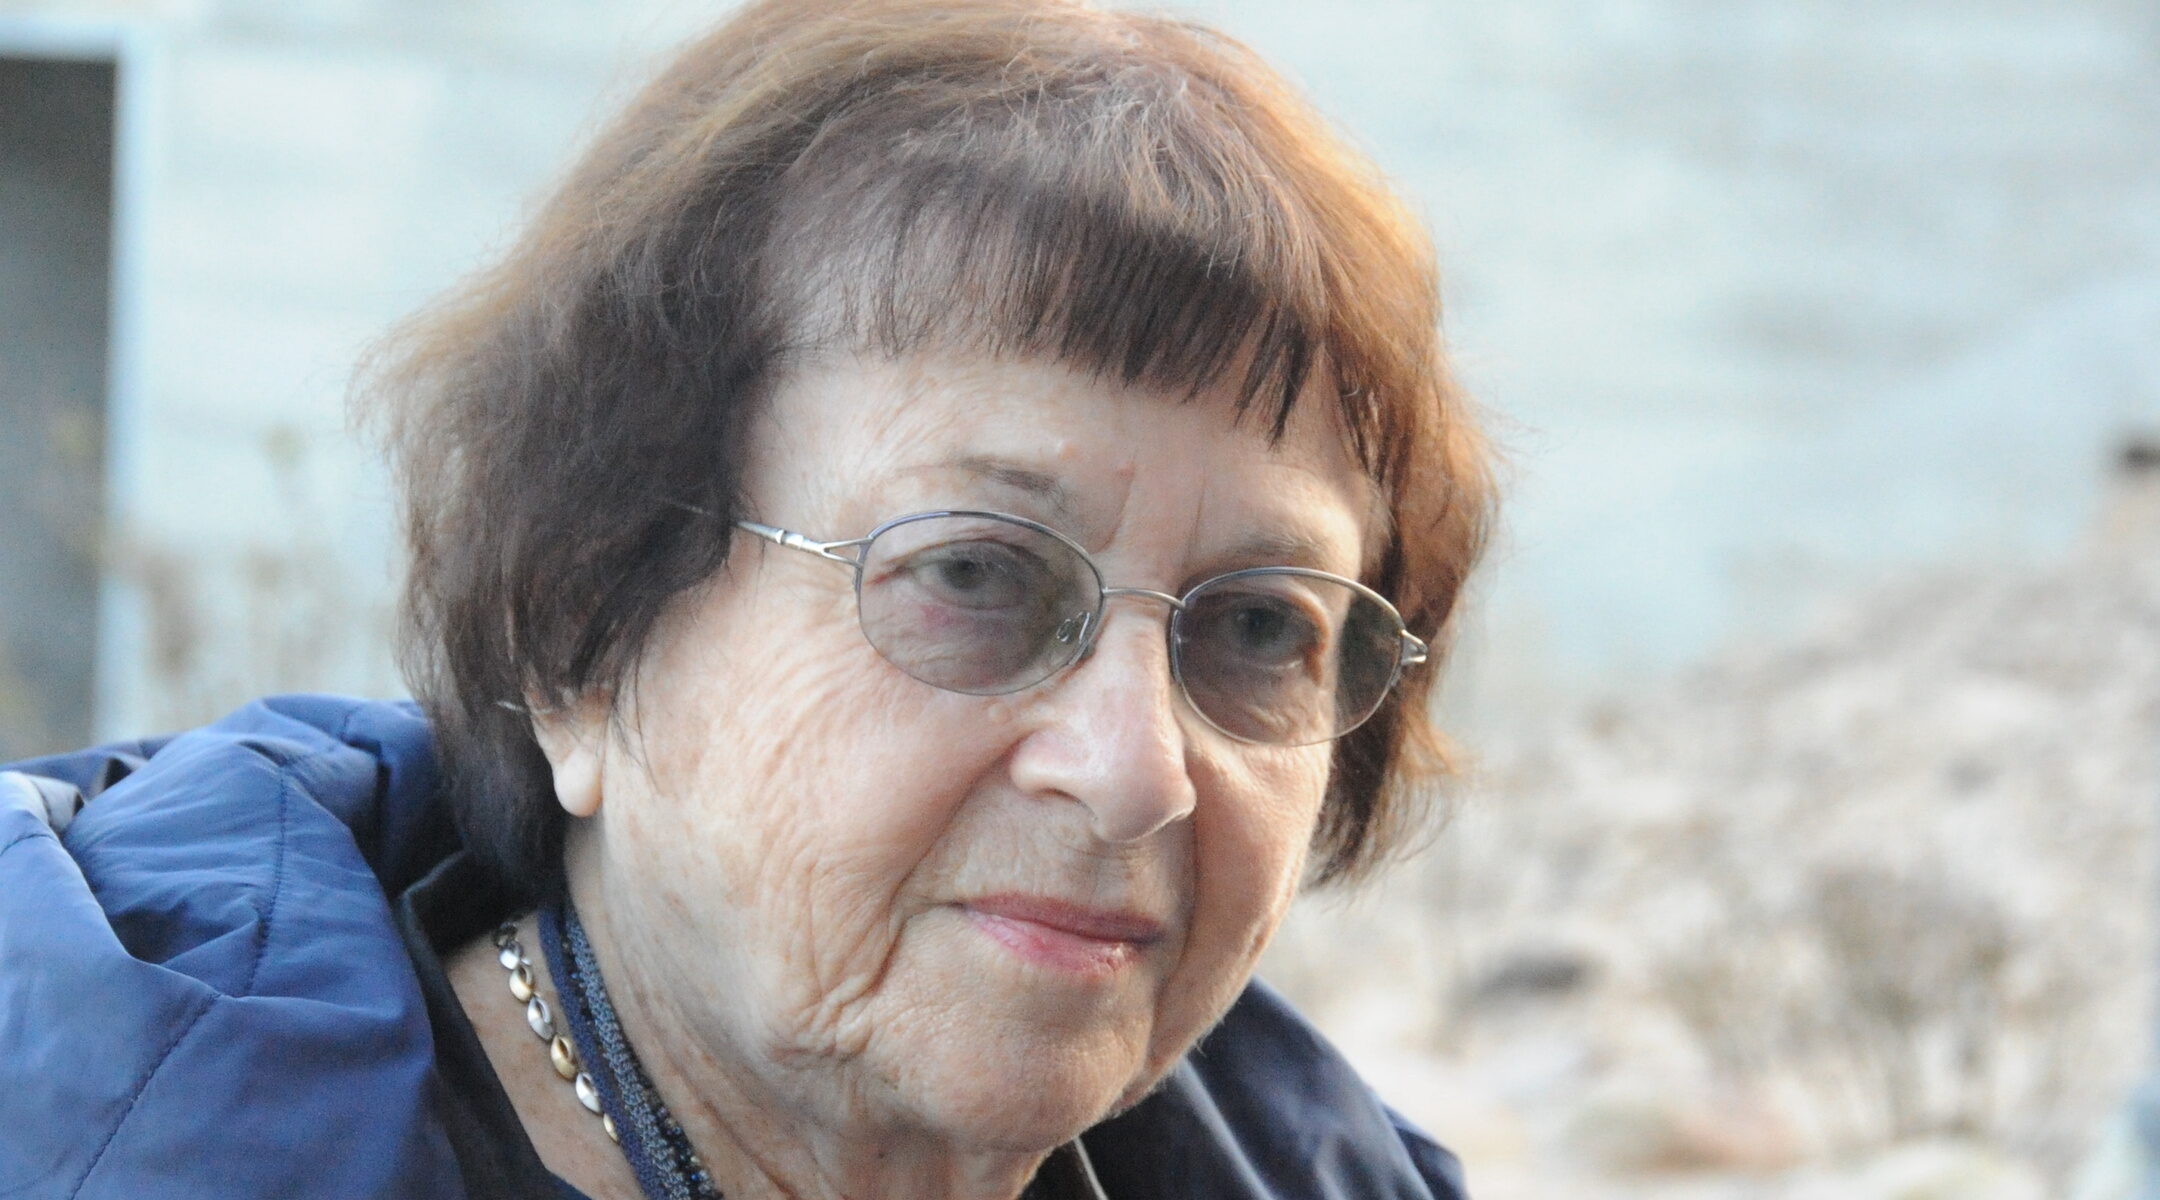 You are currently viewing Irena Veisaite, 92, Holocaust survivor turned human rights advocate